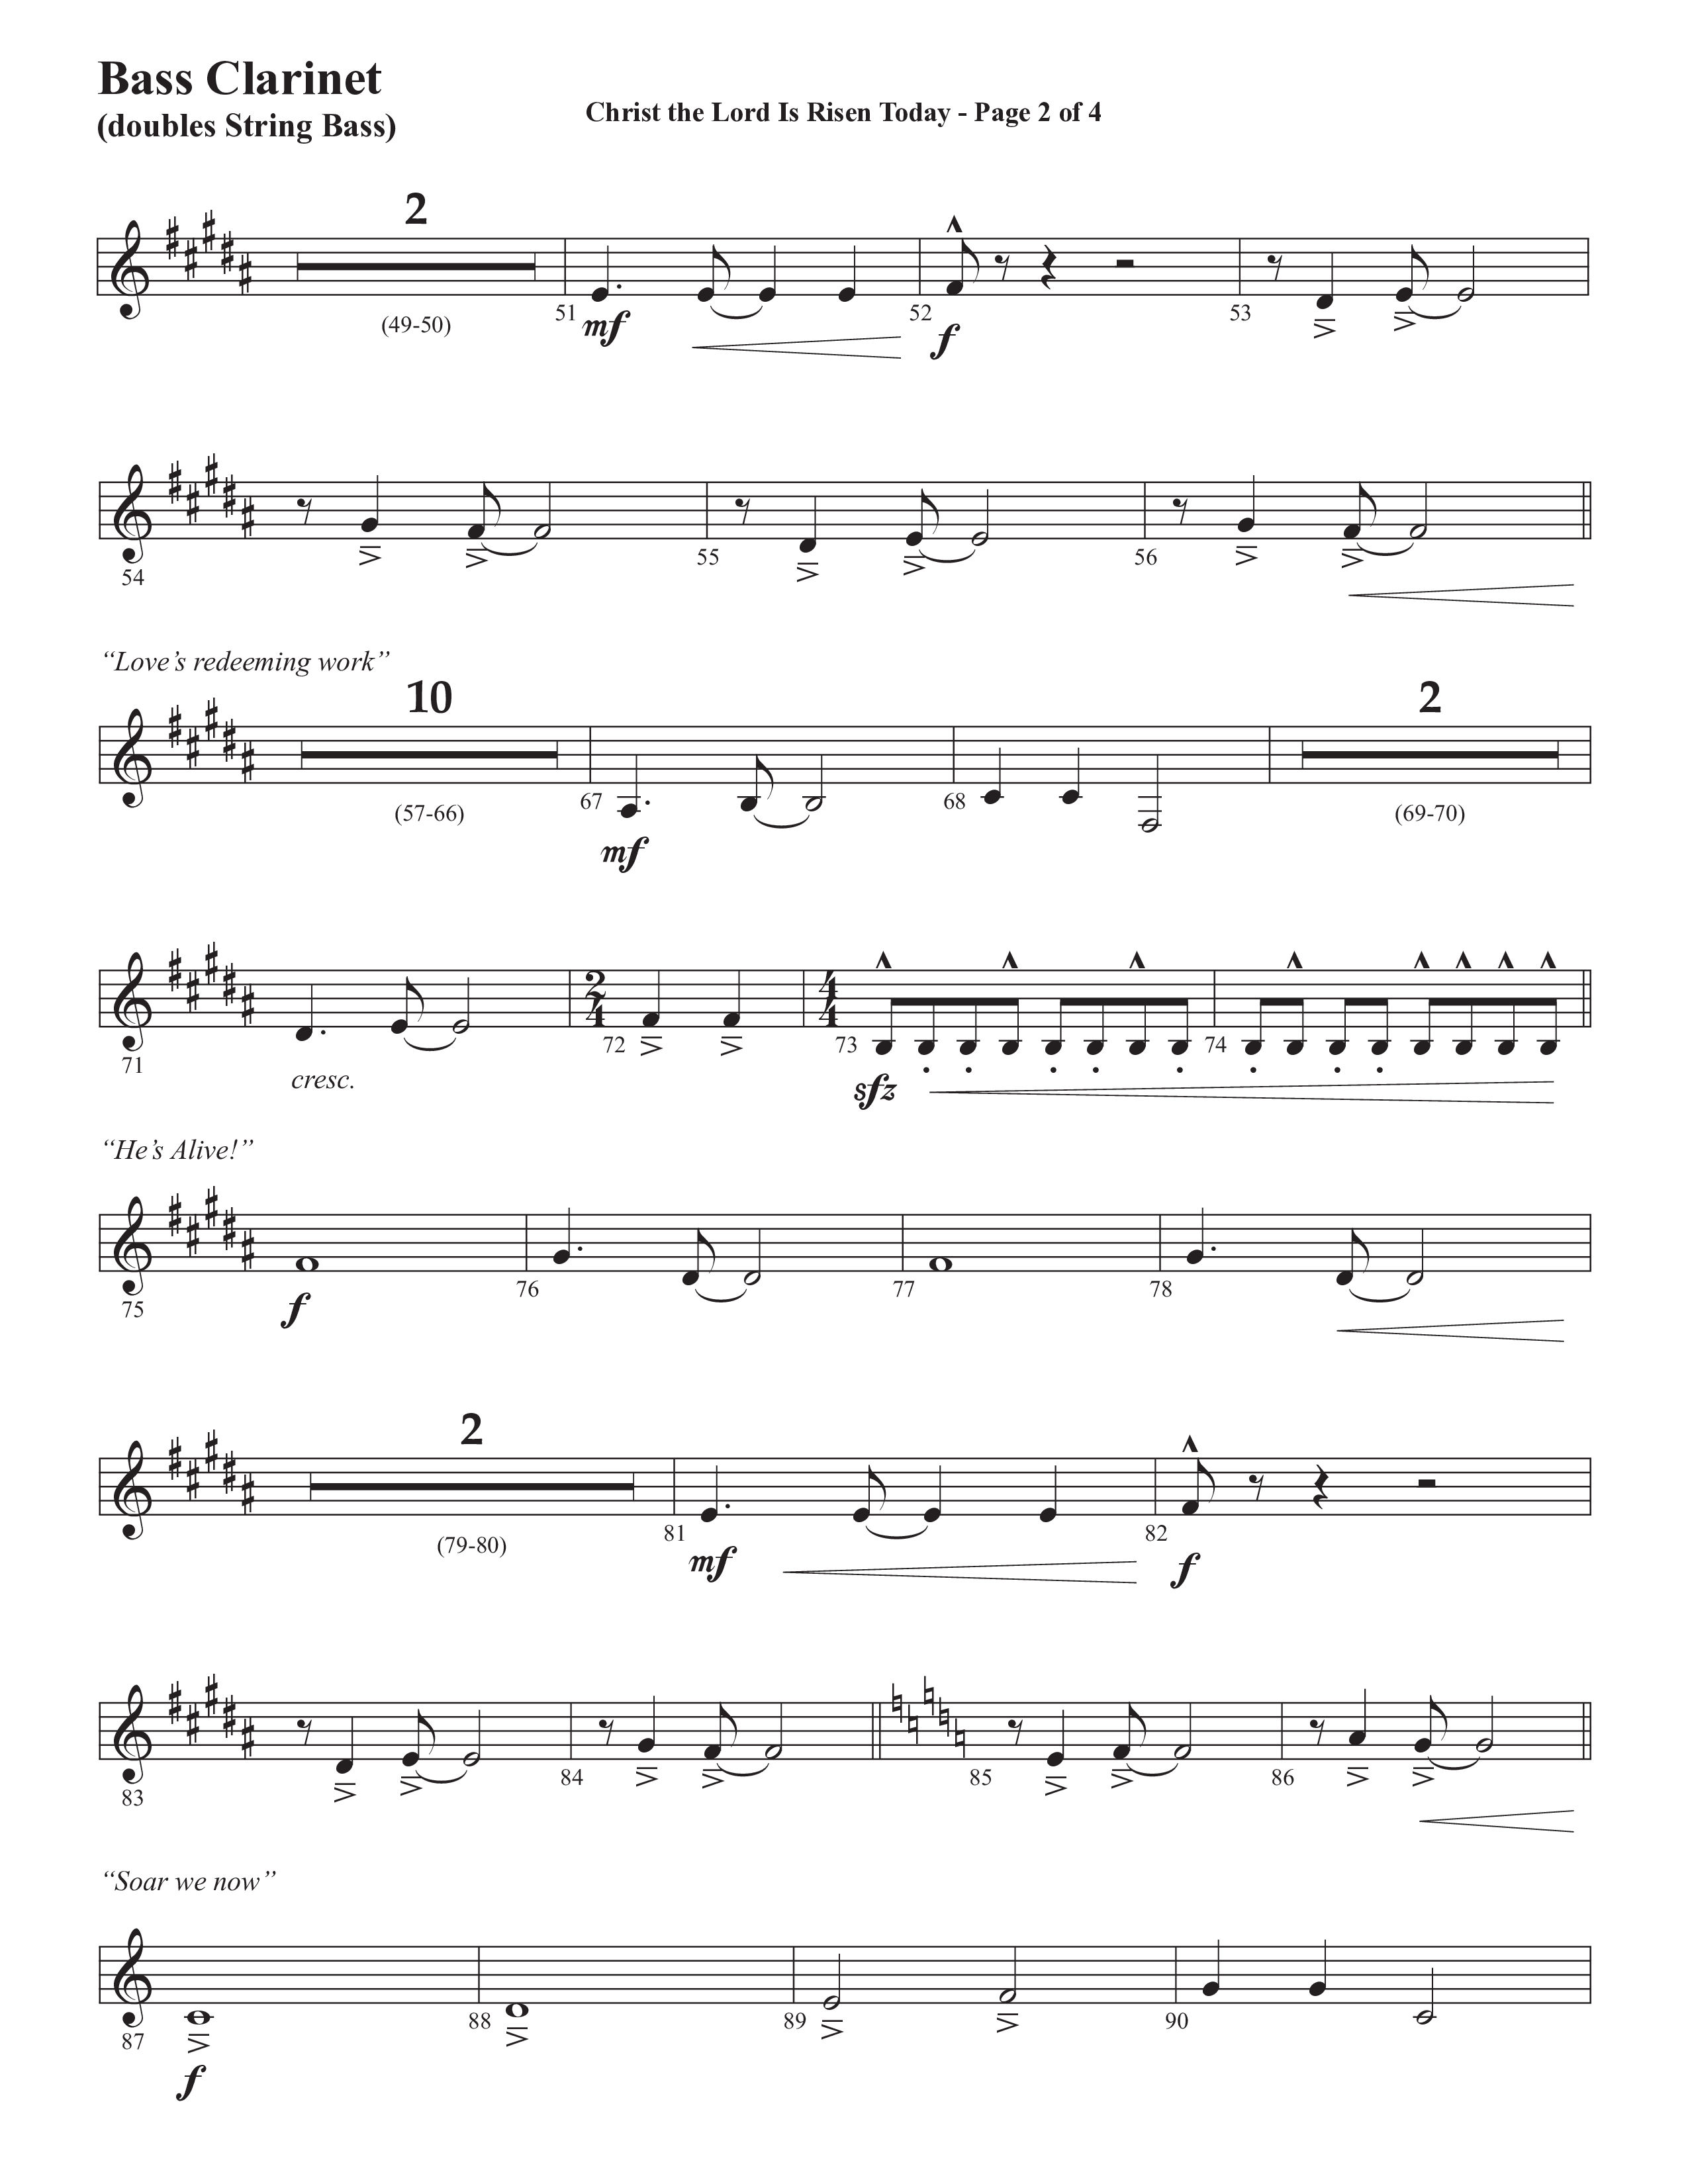 Christ The Lord Is Risen Today (He's Alive) (Choral Anthem SATB) Bass Clarinet (Semsen Music / Arr. John Bolin / Orch. Cliff Duren)